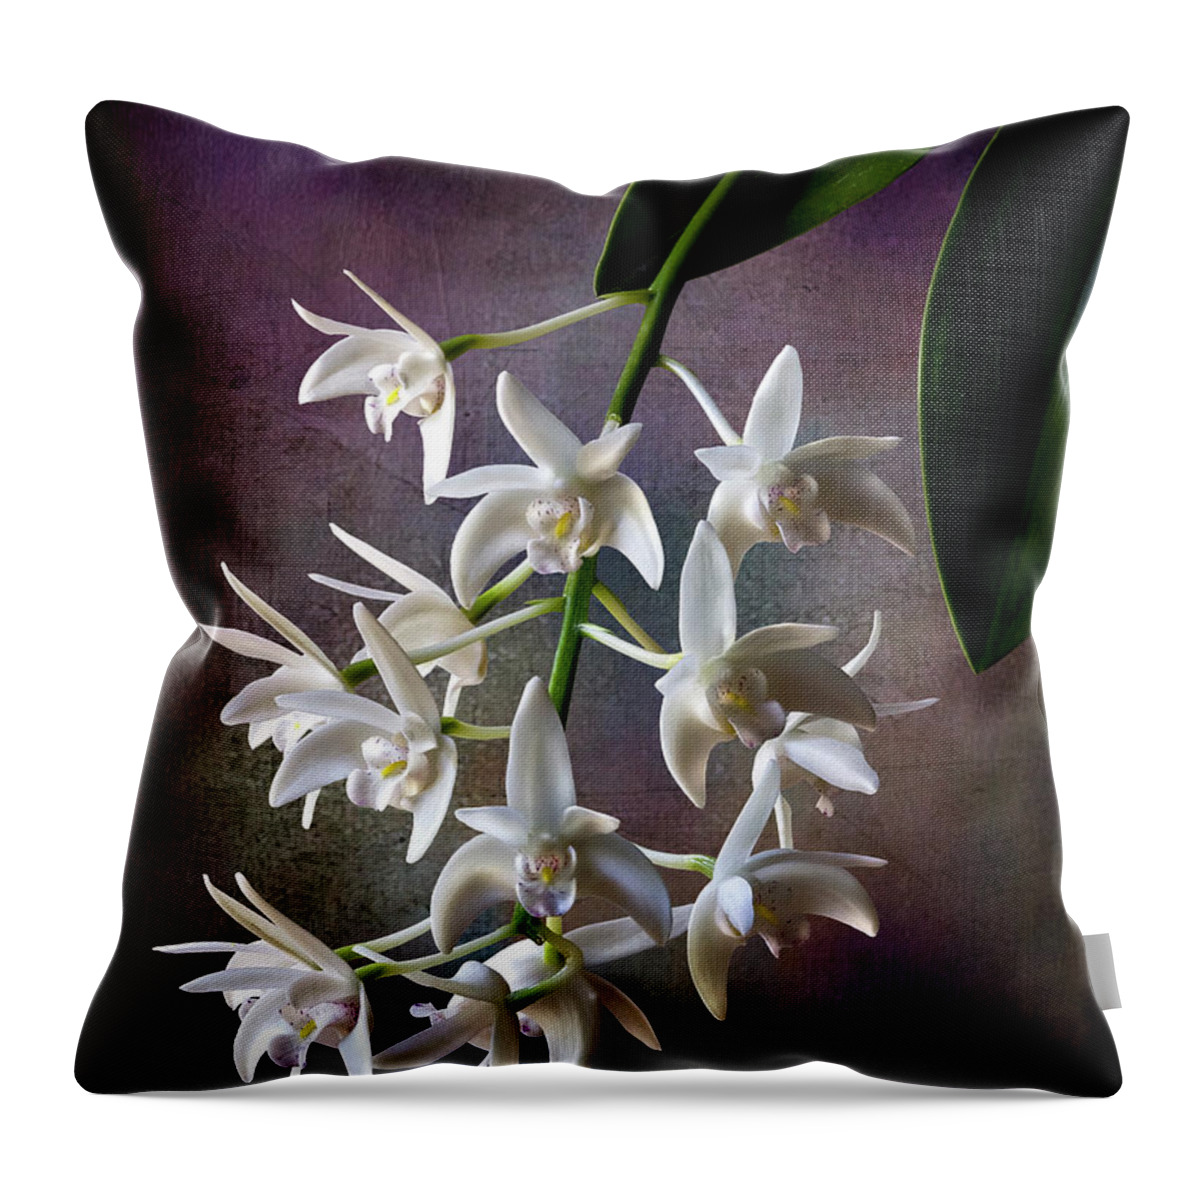 Flower Throw Pillow featuring the photograph Little White Orchids #1 by Endre Balogh